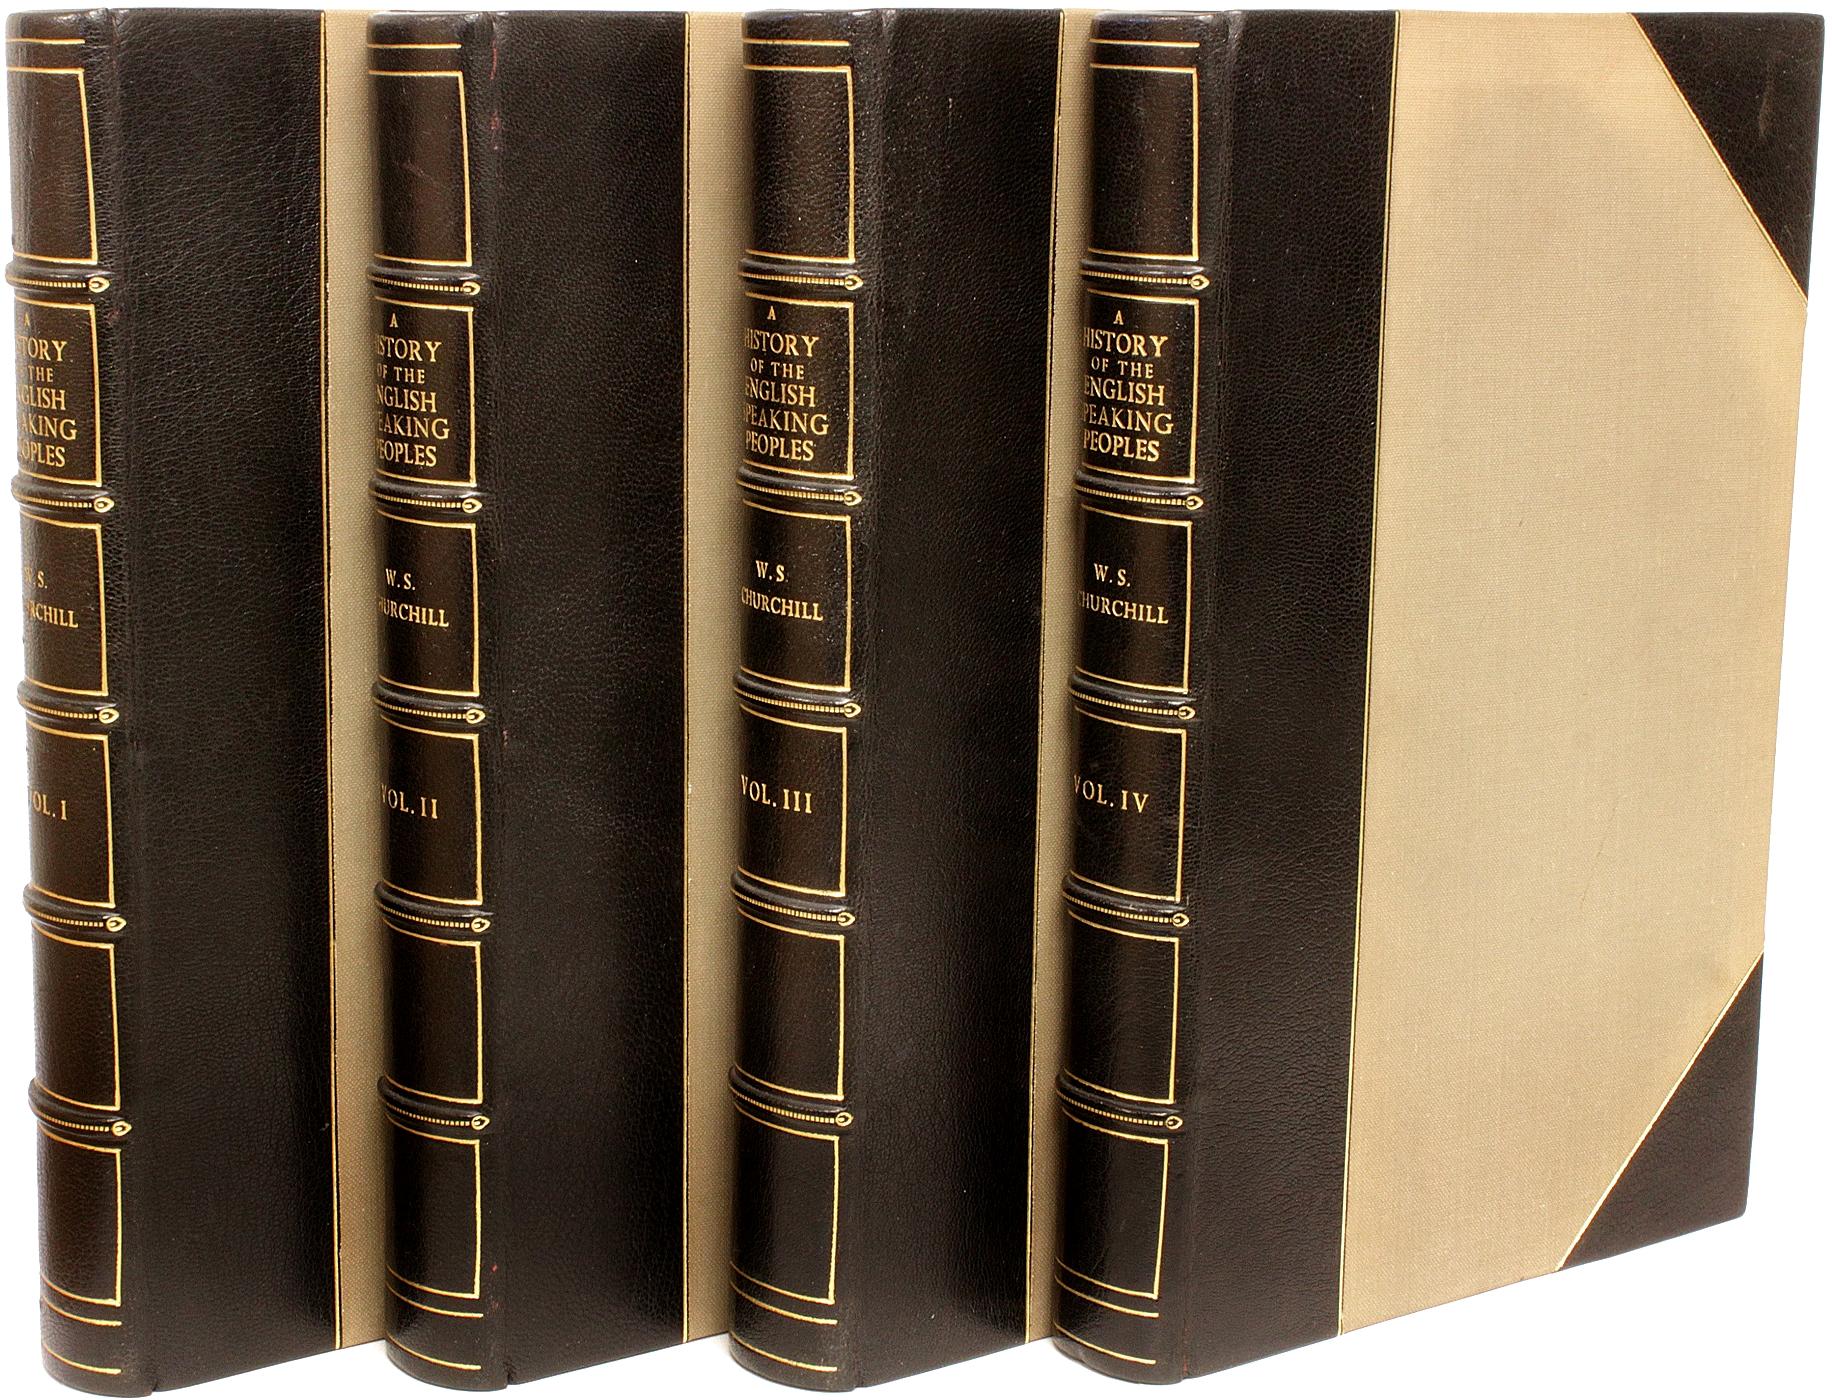 AUTHOR: CHURCHILL, Winston S.

TITLE: A History of The English-Speaking Peoples.

PUBLISHER: London: Cassell and Co, Ltd., 1956-8.

DESCRIPTION: ALL FIRST LONDON EDITIONS. 4 volumes, 9-9/16